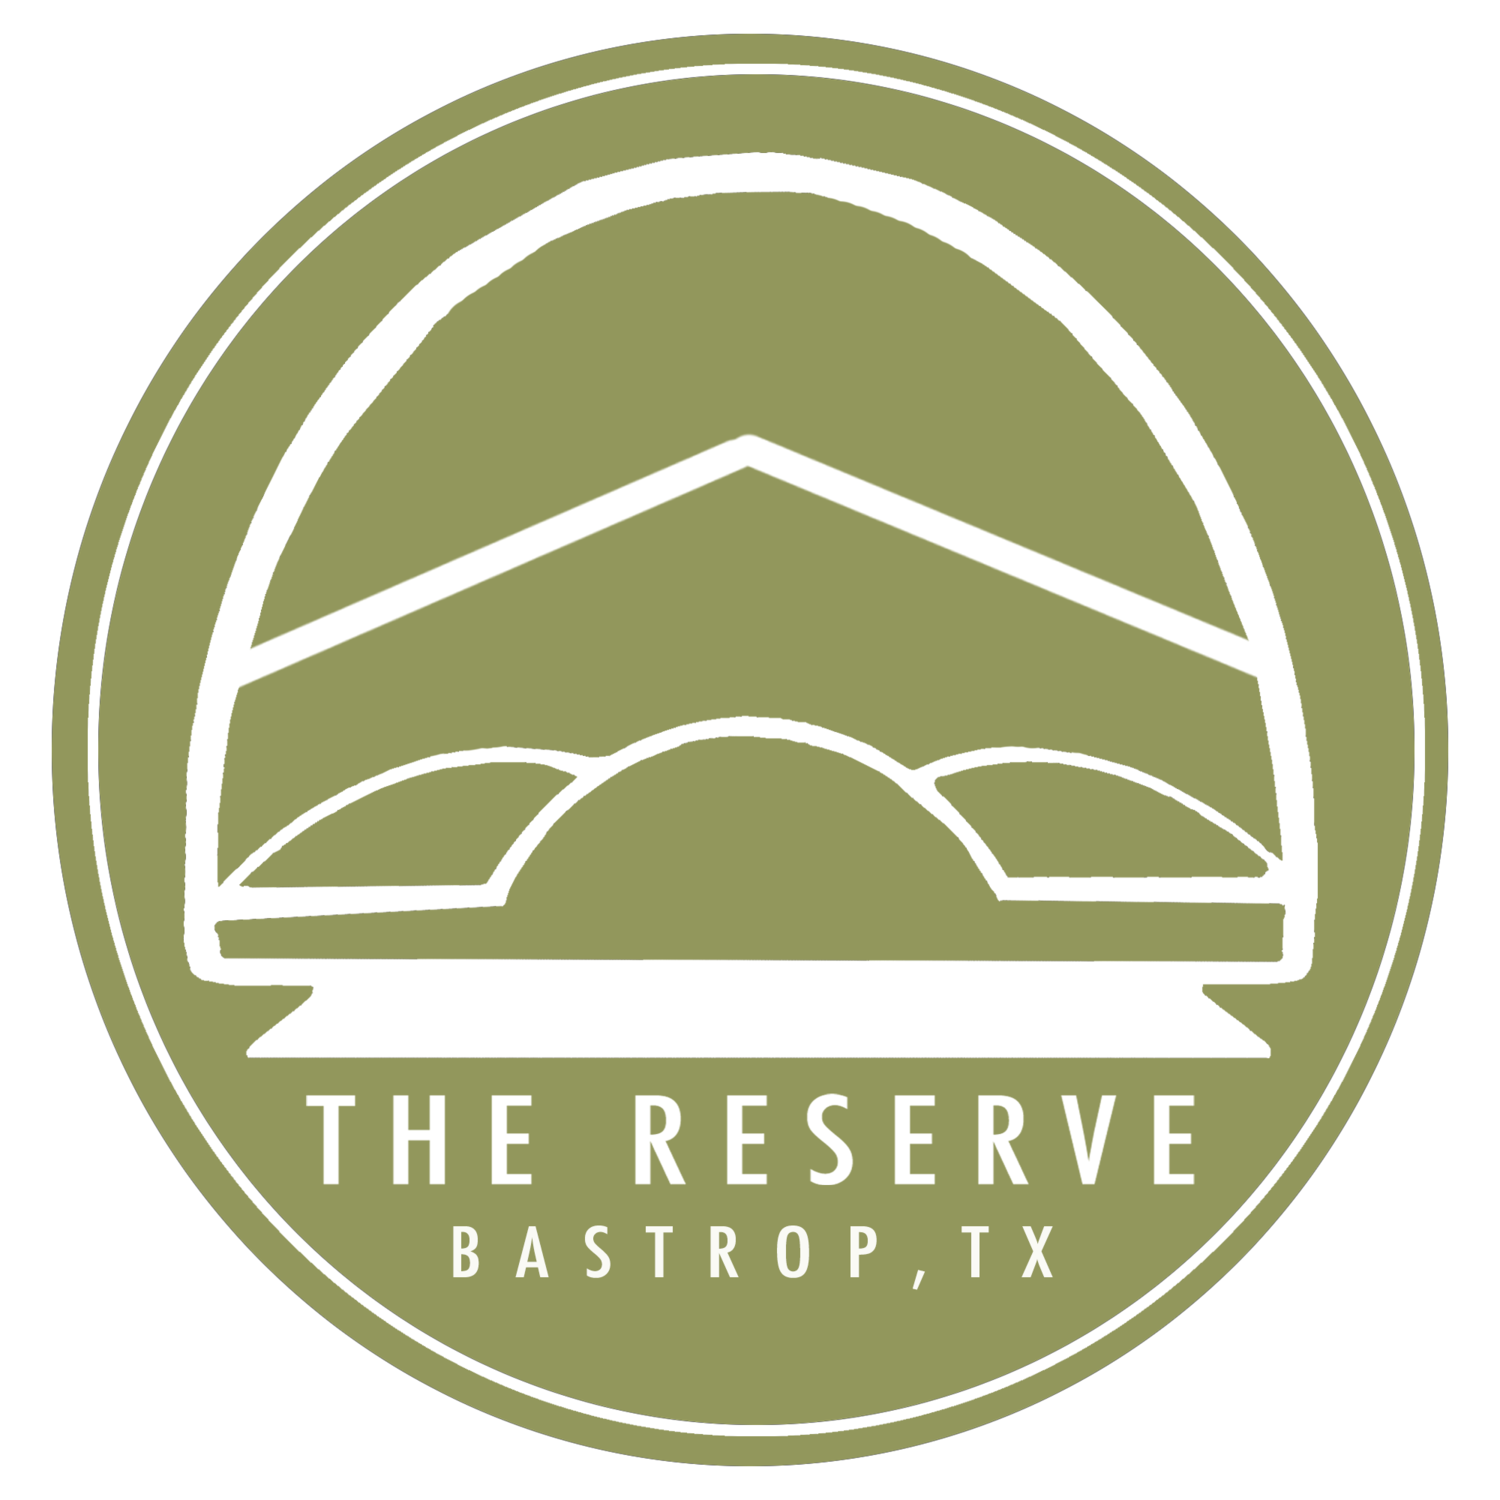 THE RESERVE